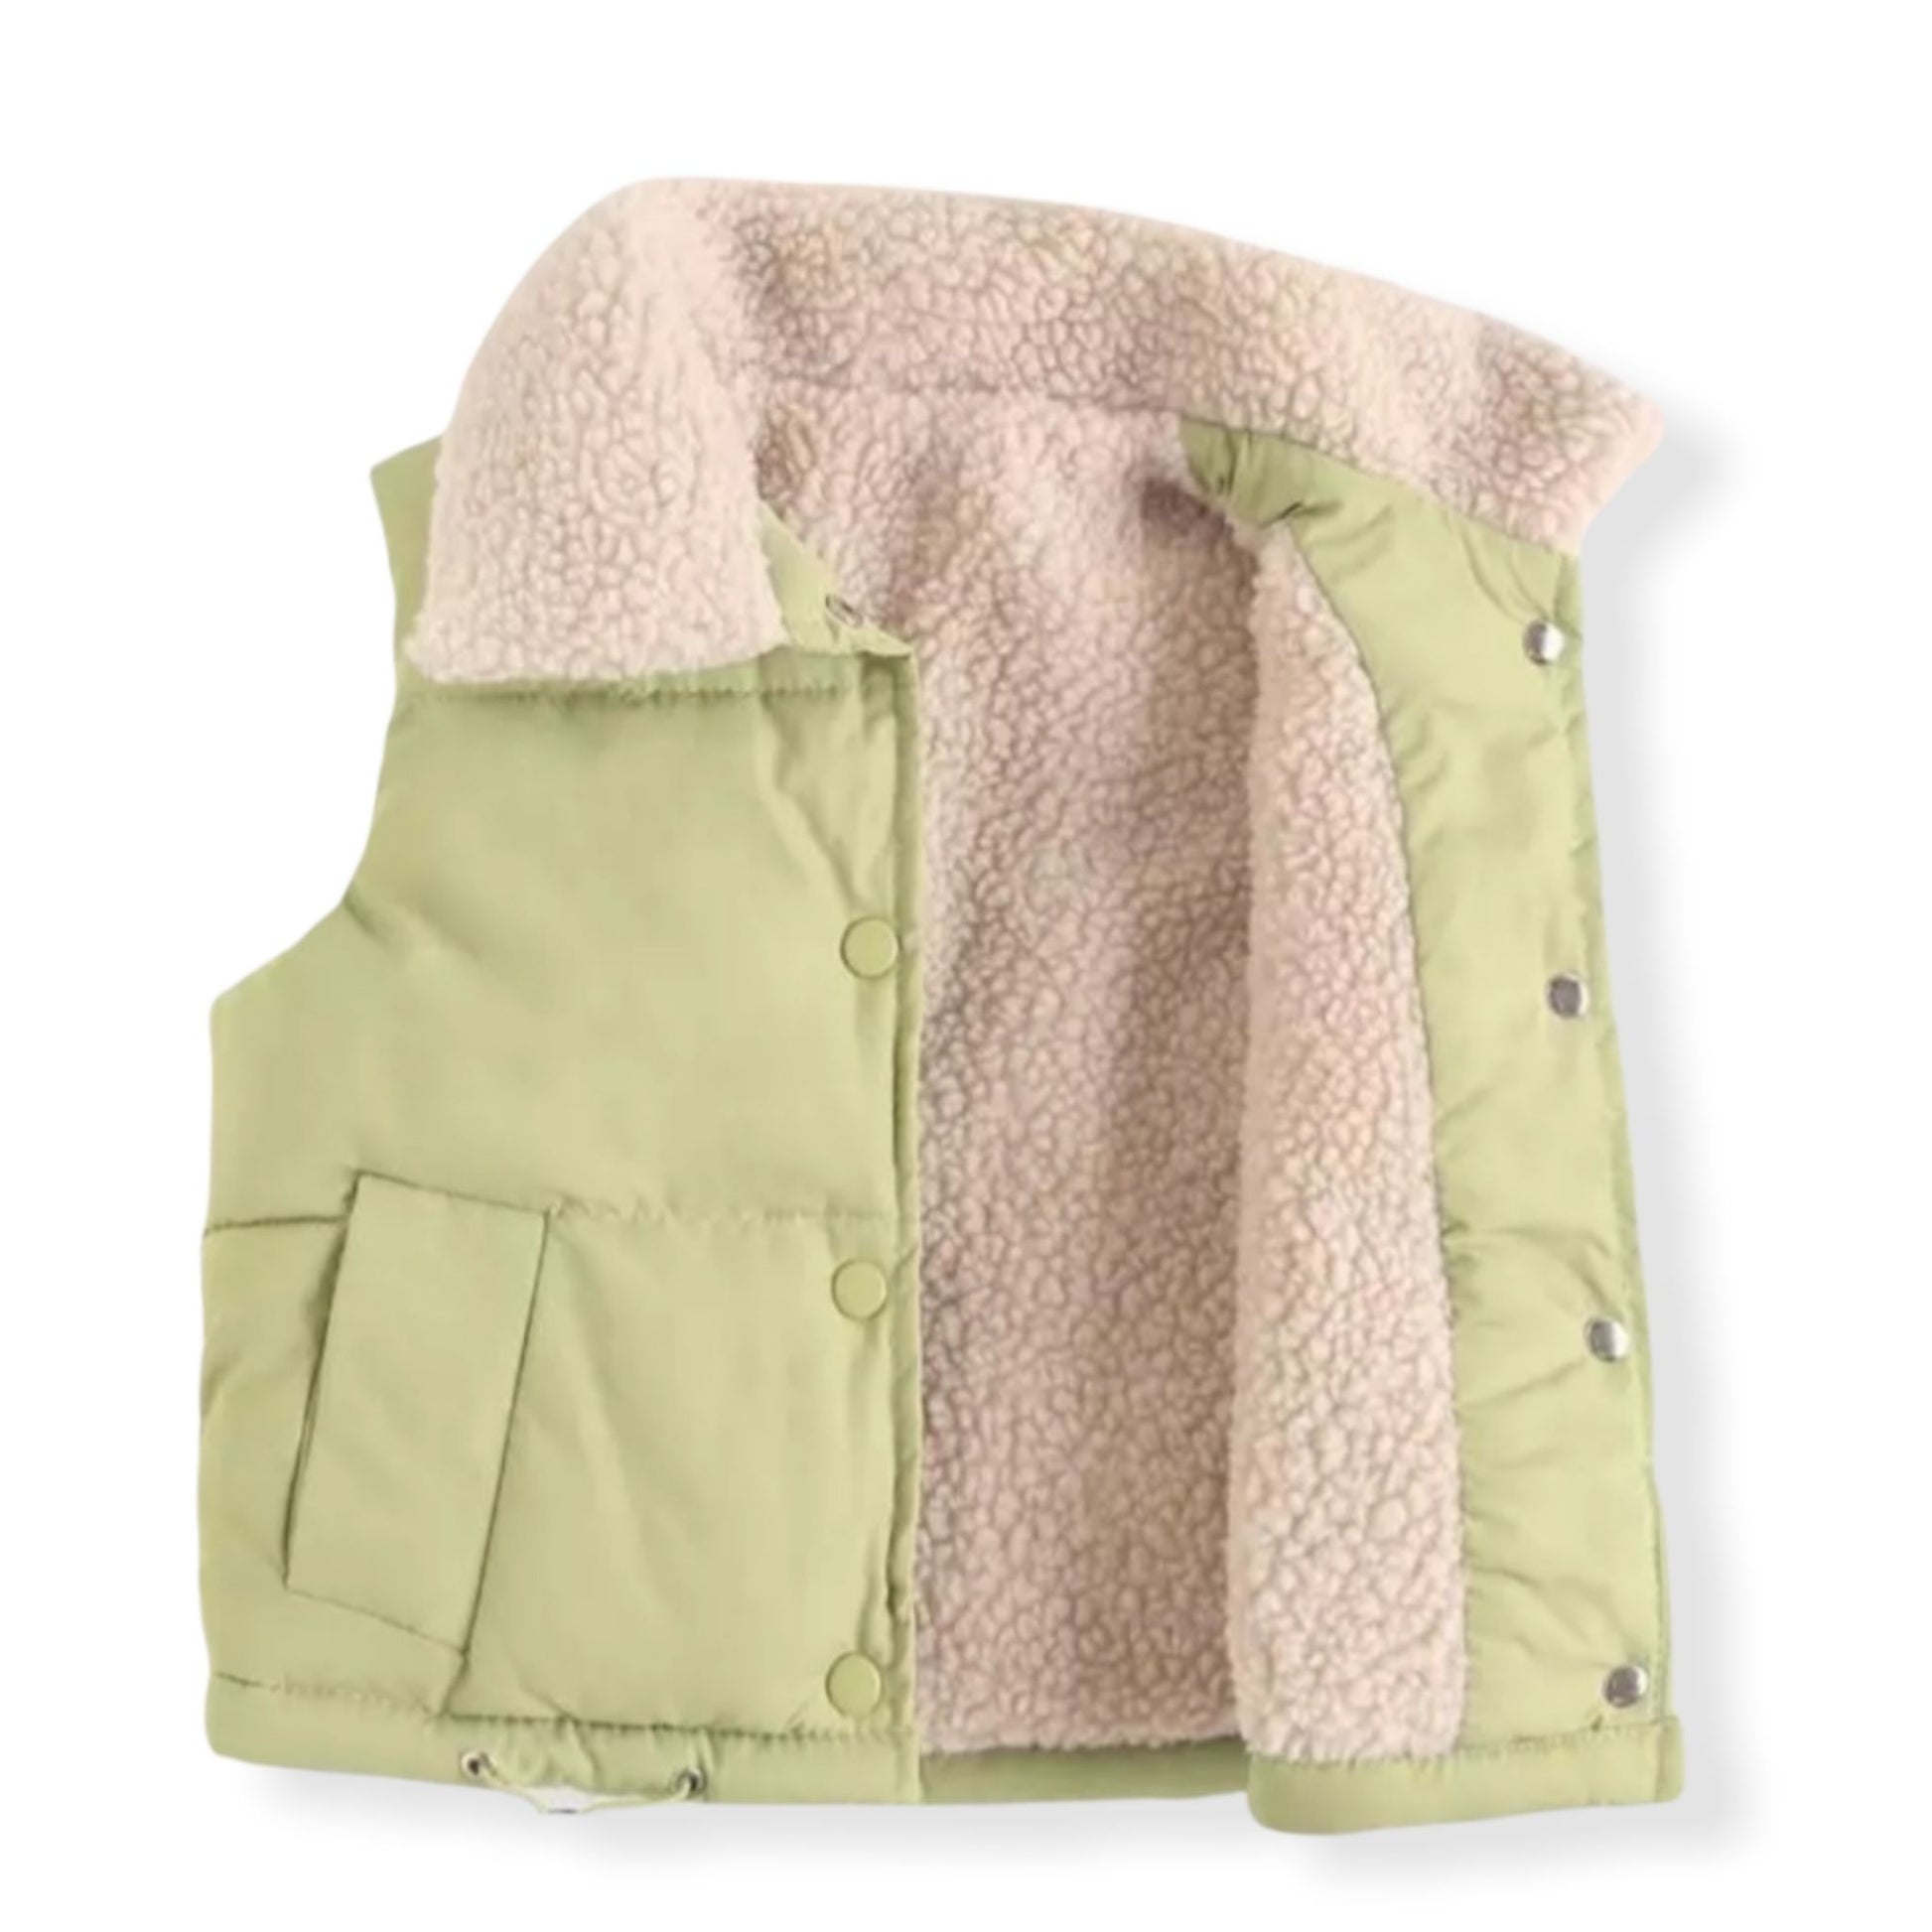 Winter Puffer Vest for Toddlers Green